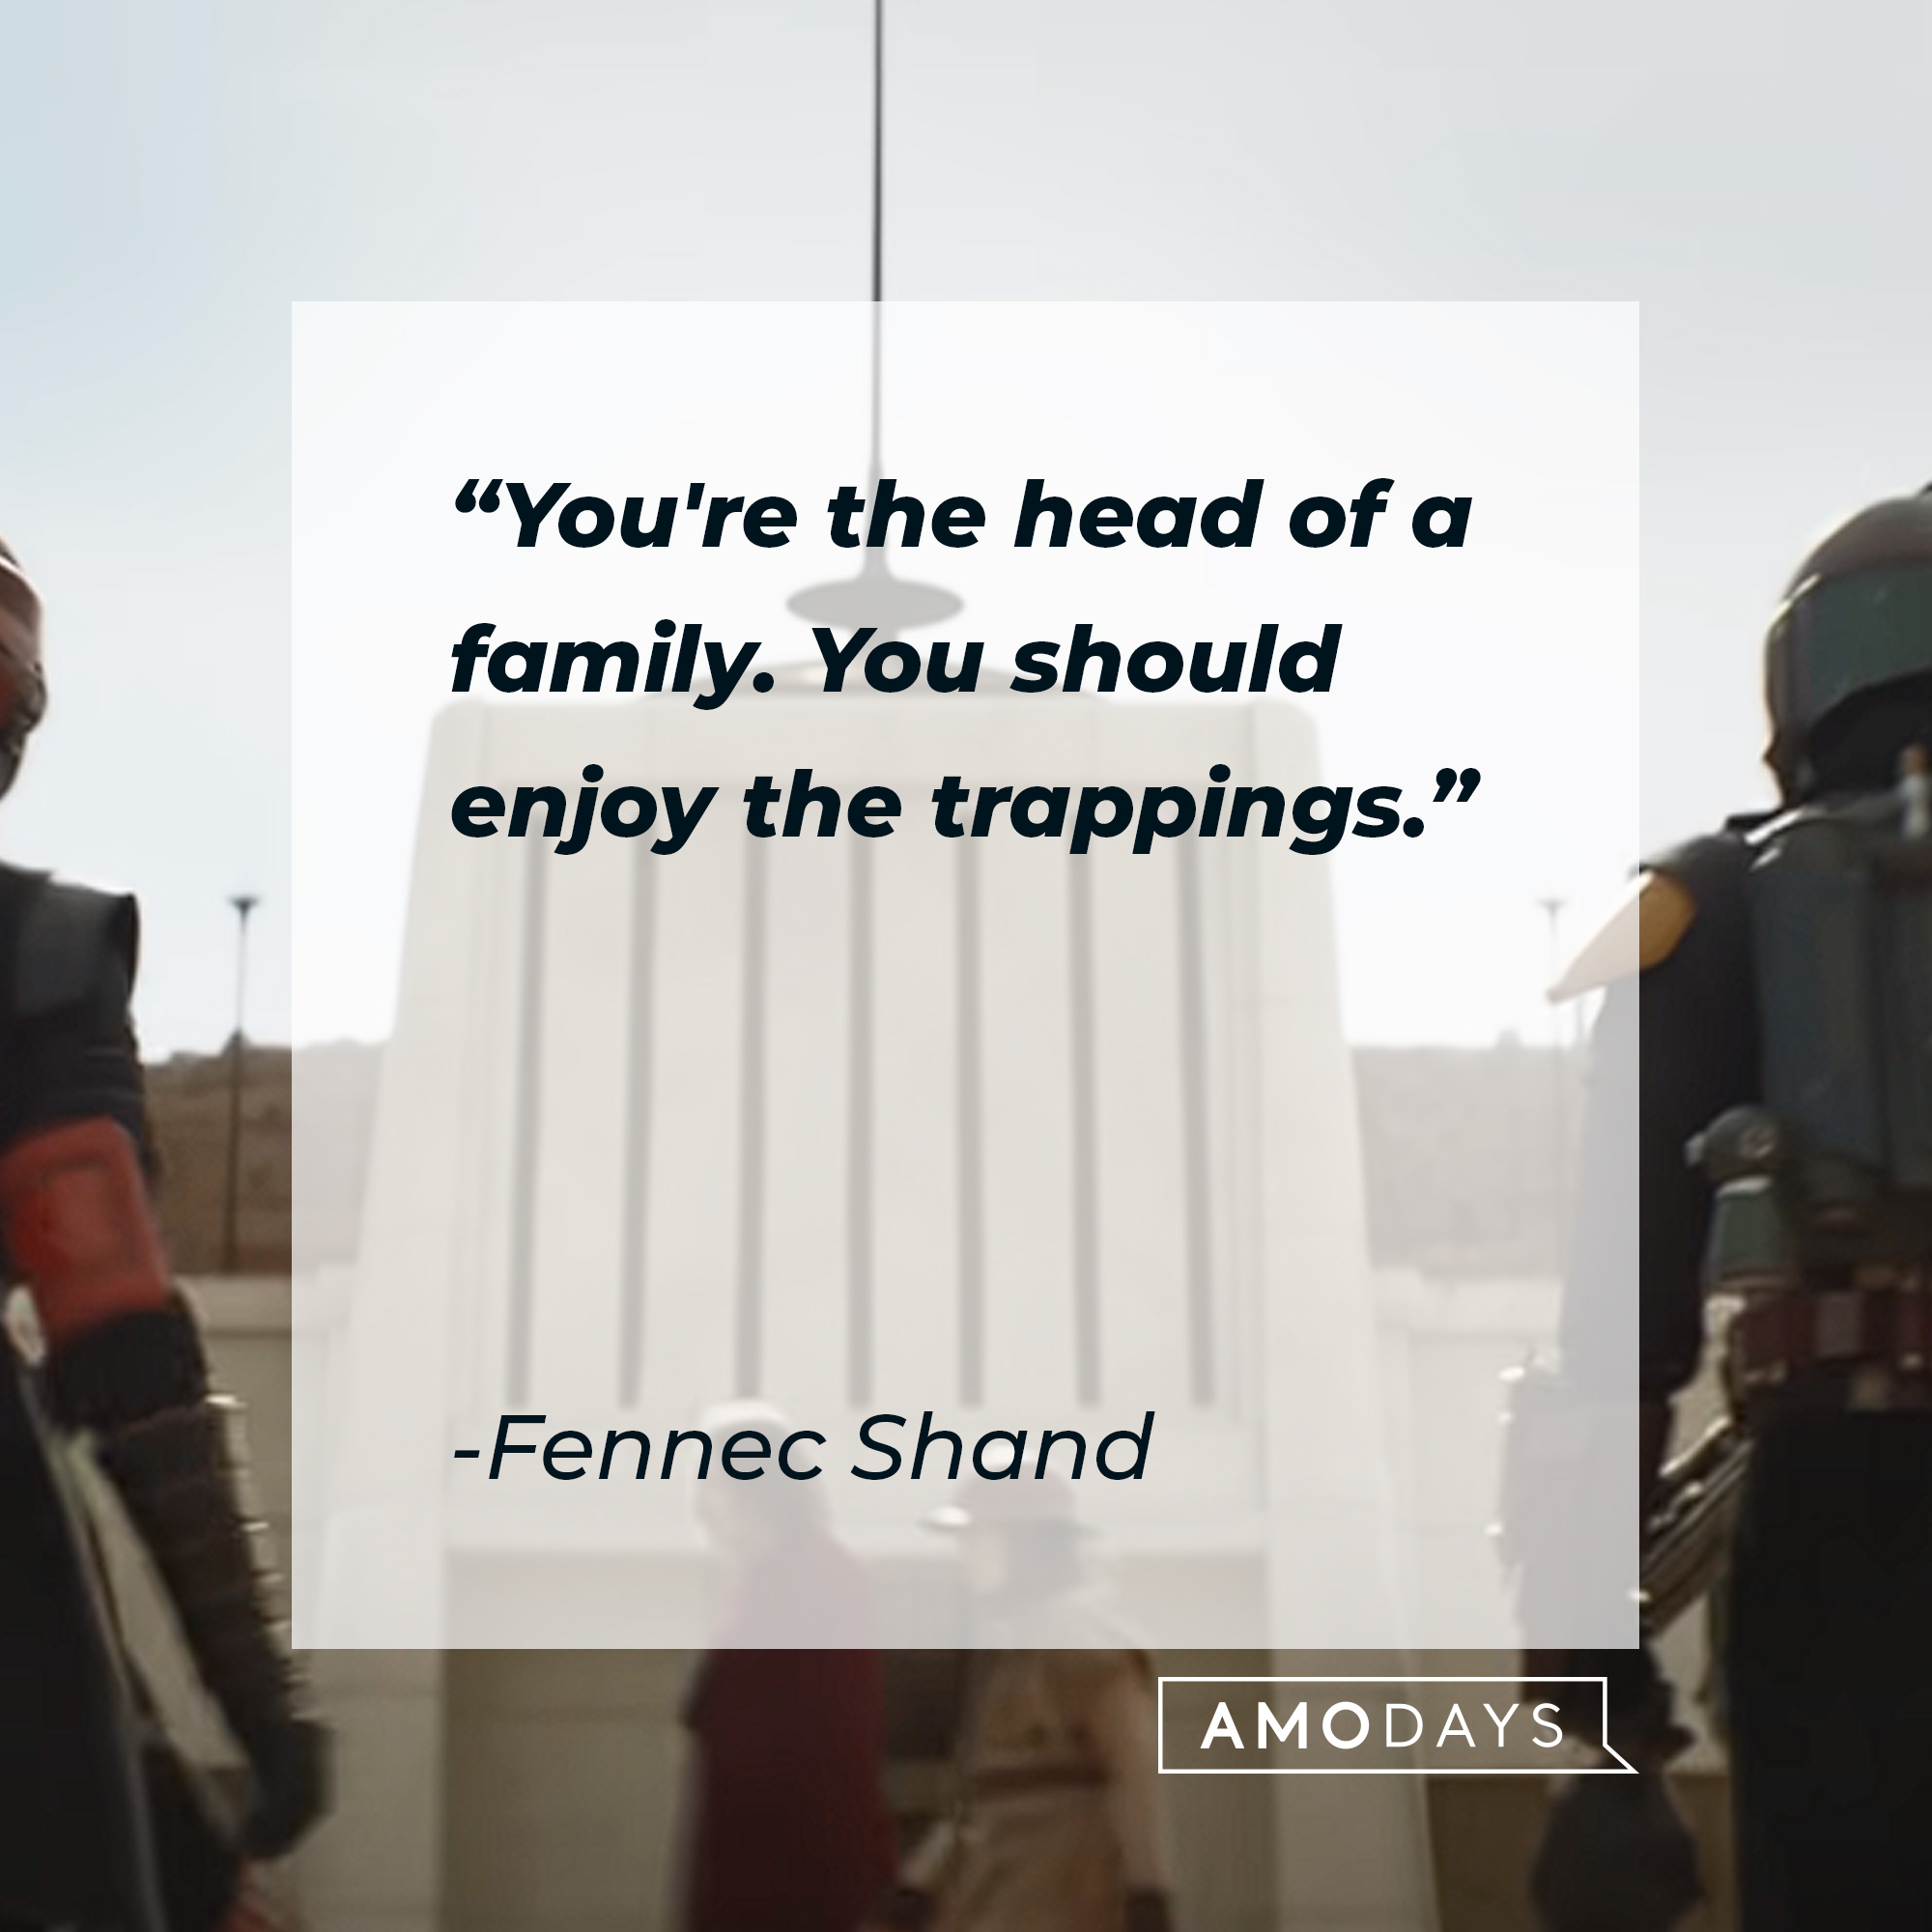 Fennec Shand's quote: "You're the head of a family. You should enjoy the trappings." | Source: youtube.com/StarWars